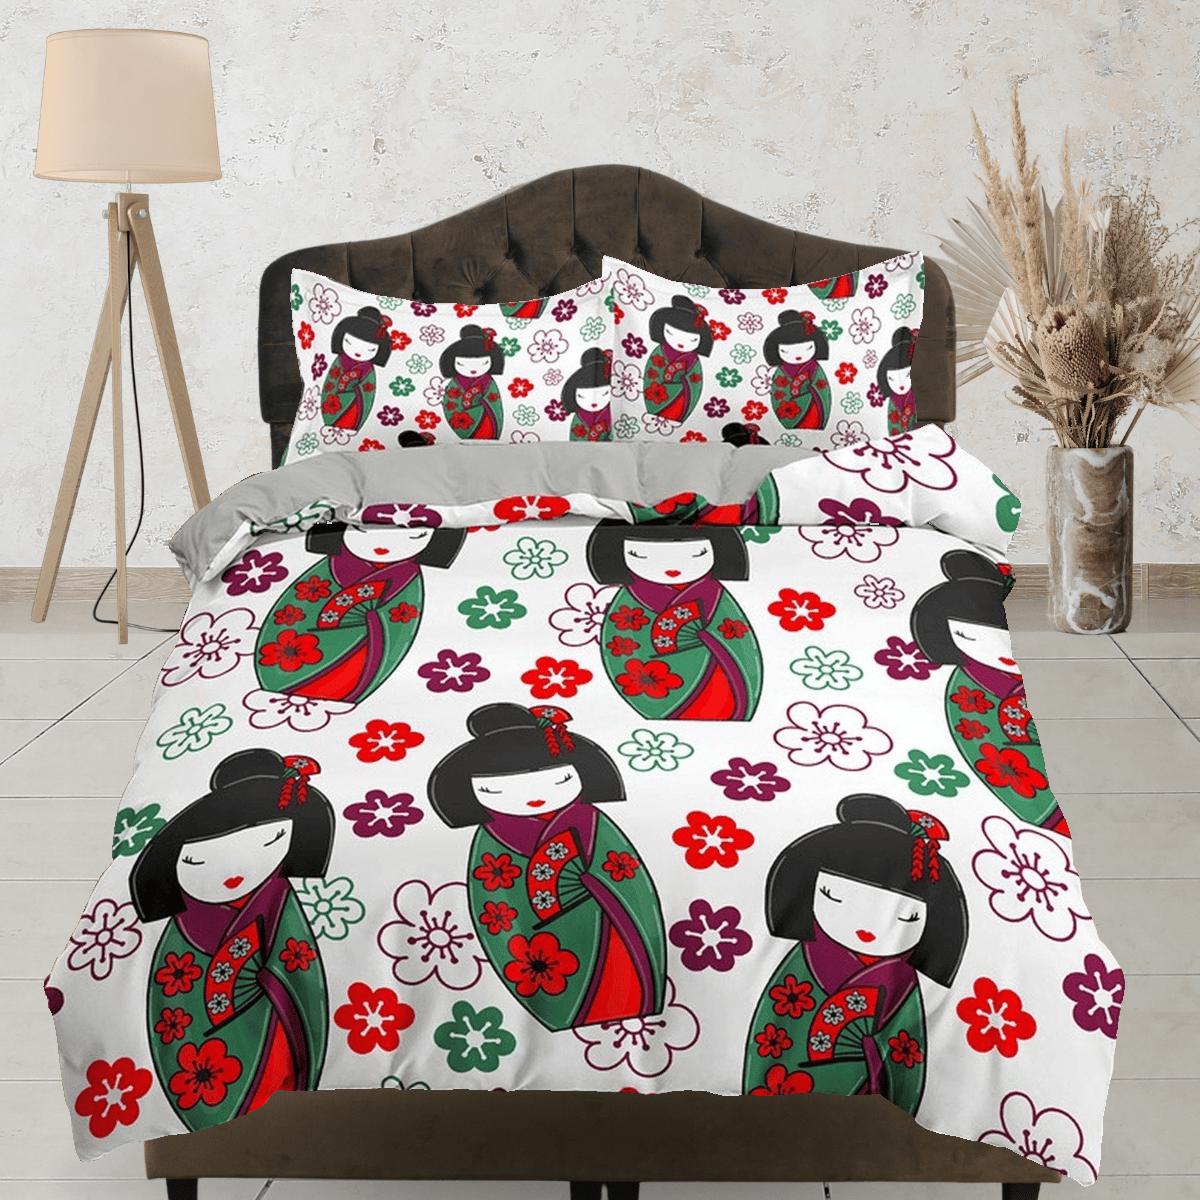 daintyduvet Cute oriental bedding, japan culture, geisha in kimono and floral prints, japanese duvet cover for king, queen, full, twin, toddler bedding